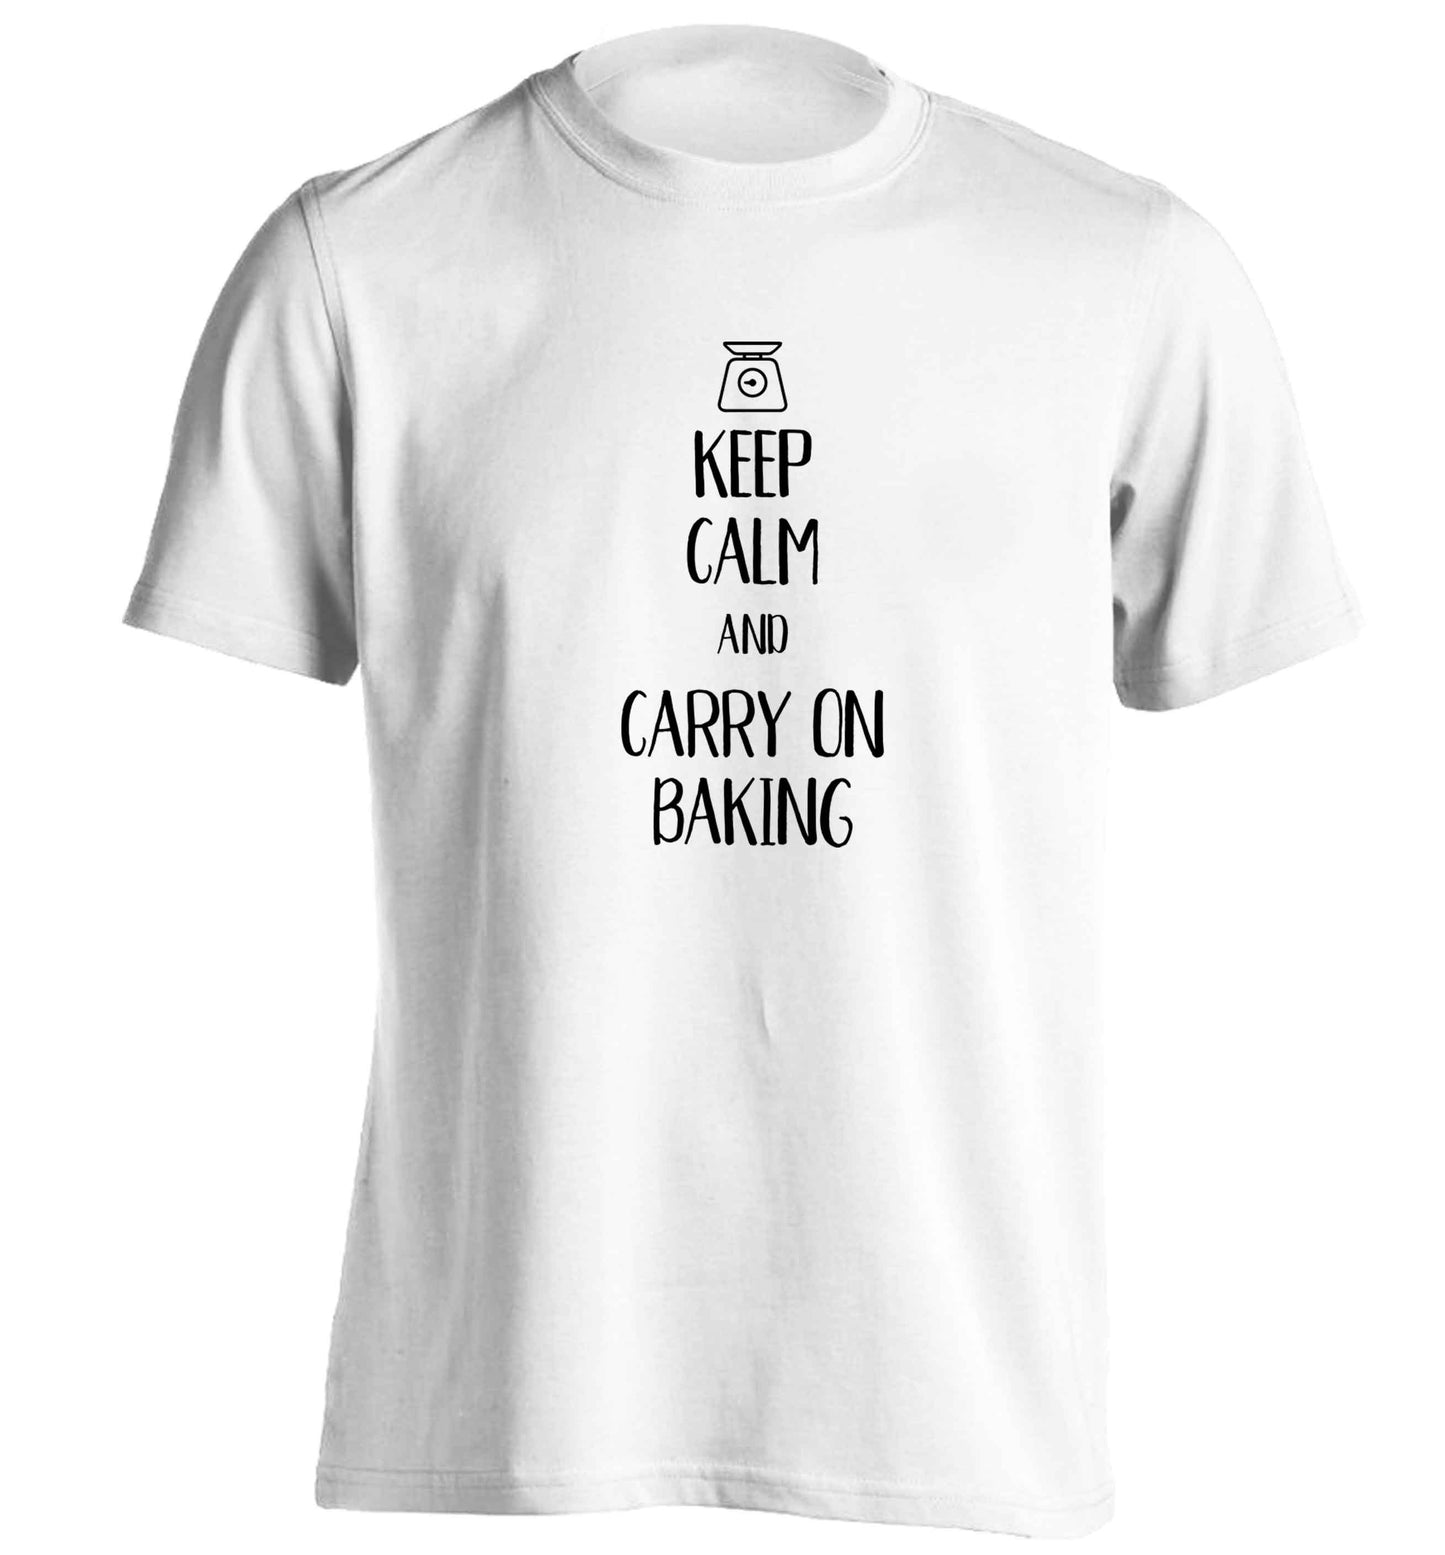 Keep calm and carry on baking adults unisex white Tshirt 2XL